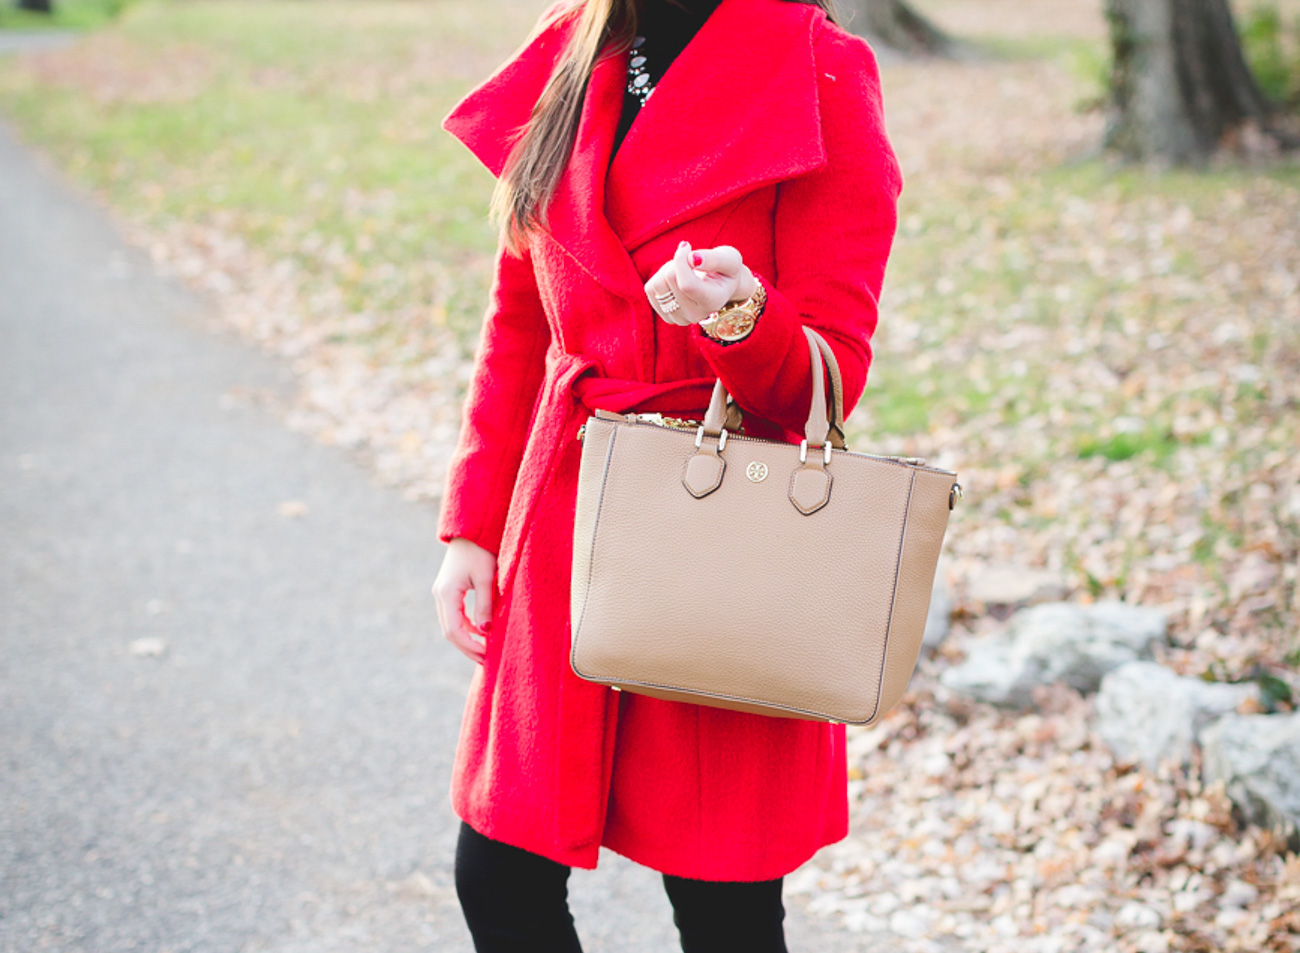 red wrap coat, holiday coat, holiday outfit, holiday style, holiday party look, leopard pumps, calf hair pumps, baublebar statement necklace // grace wainwright from a southern drawl